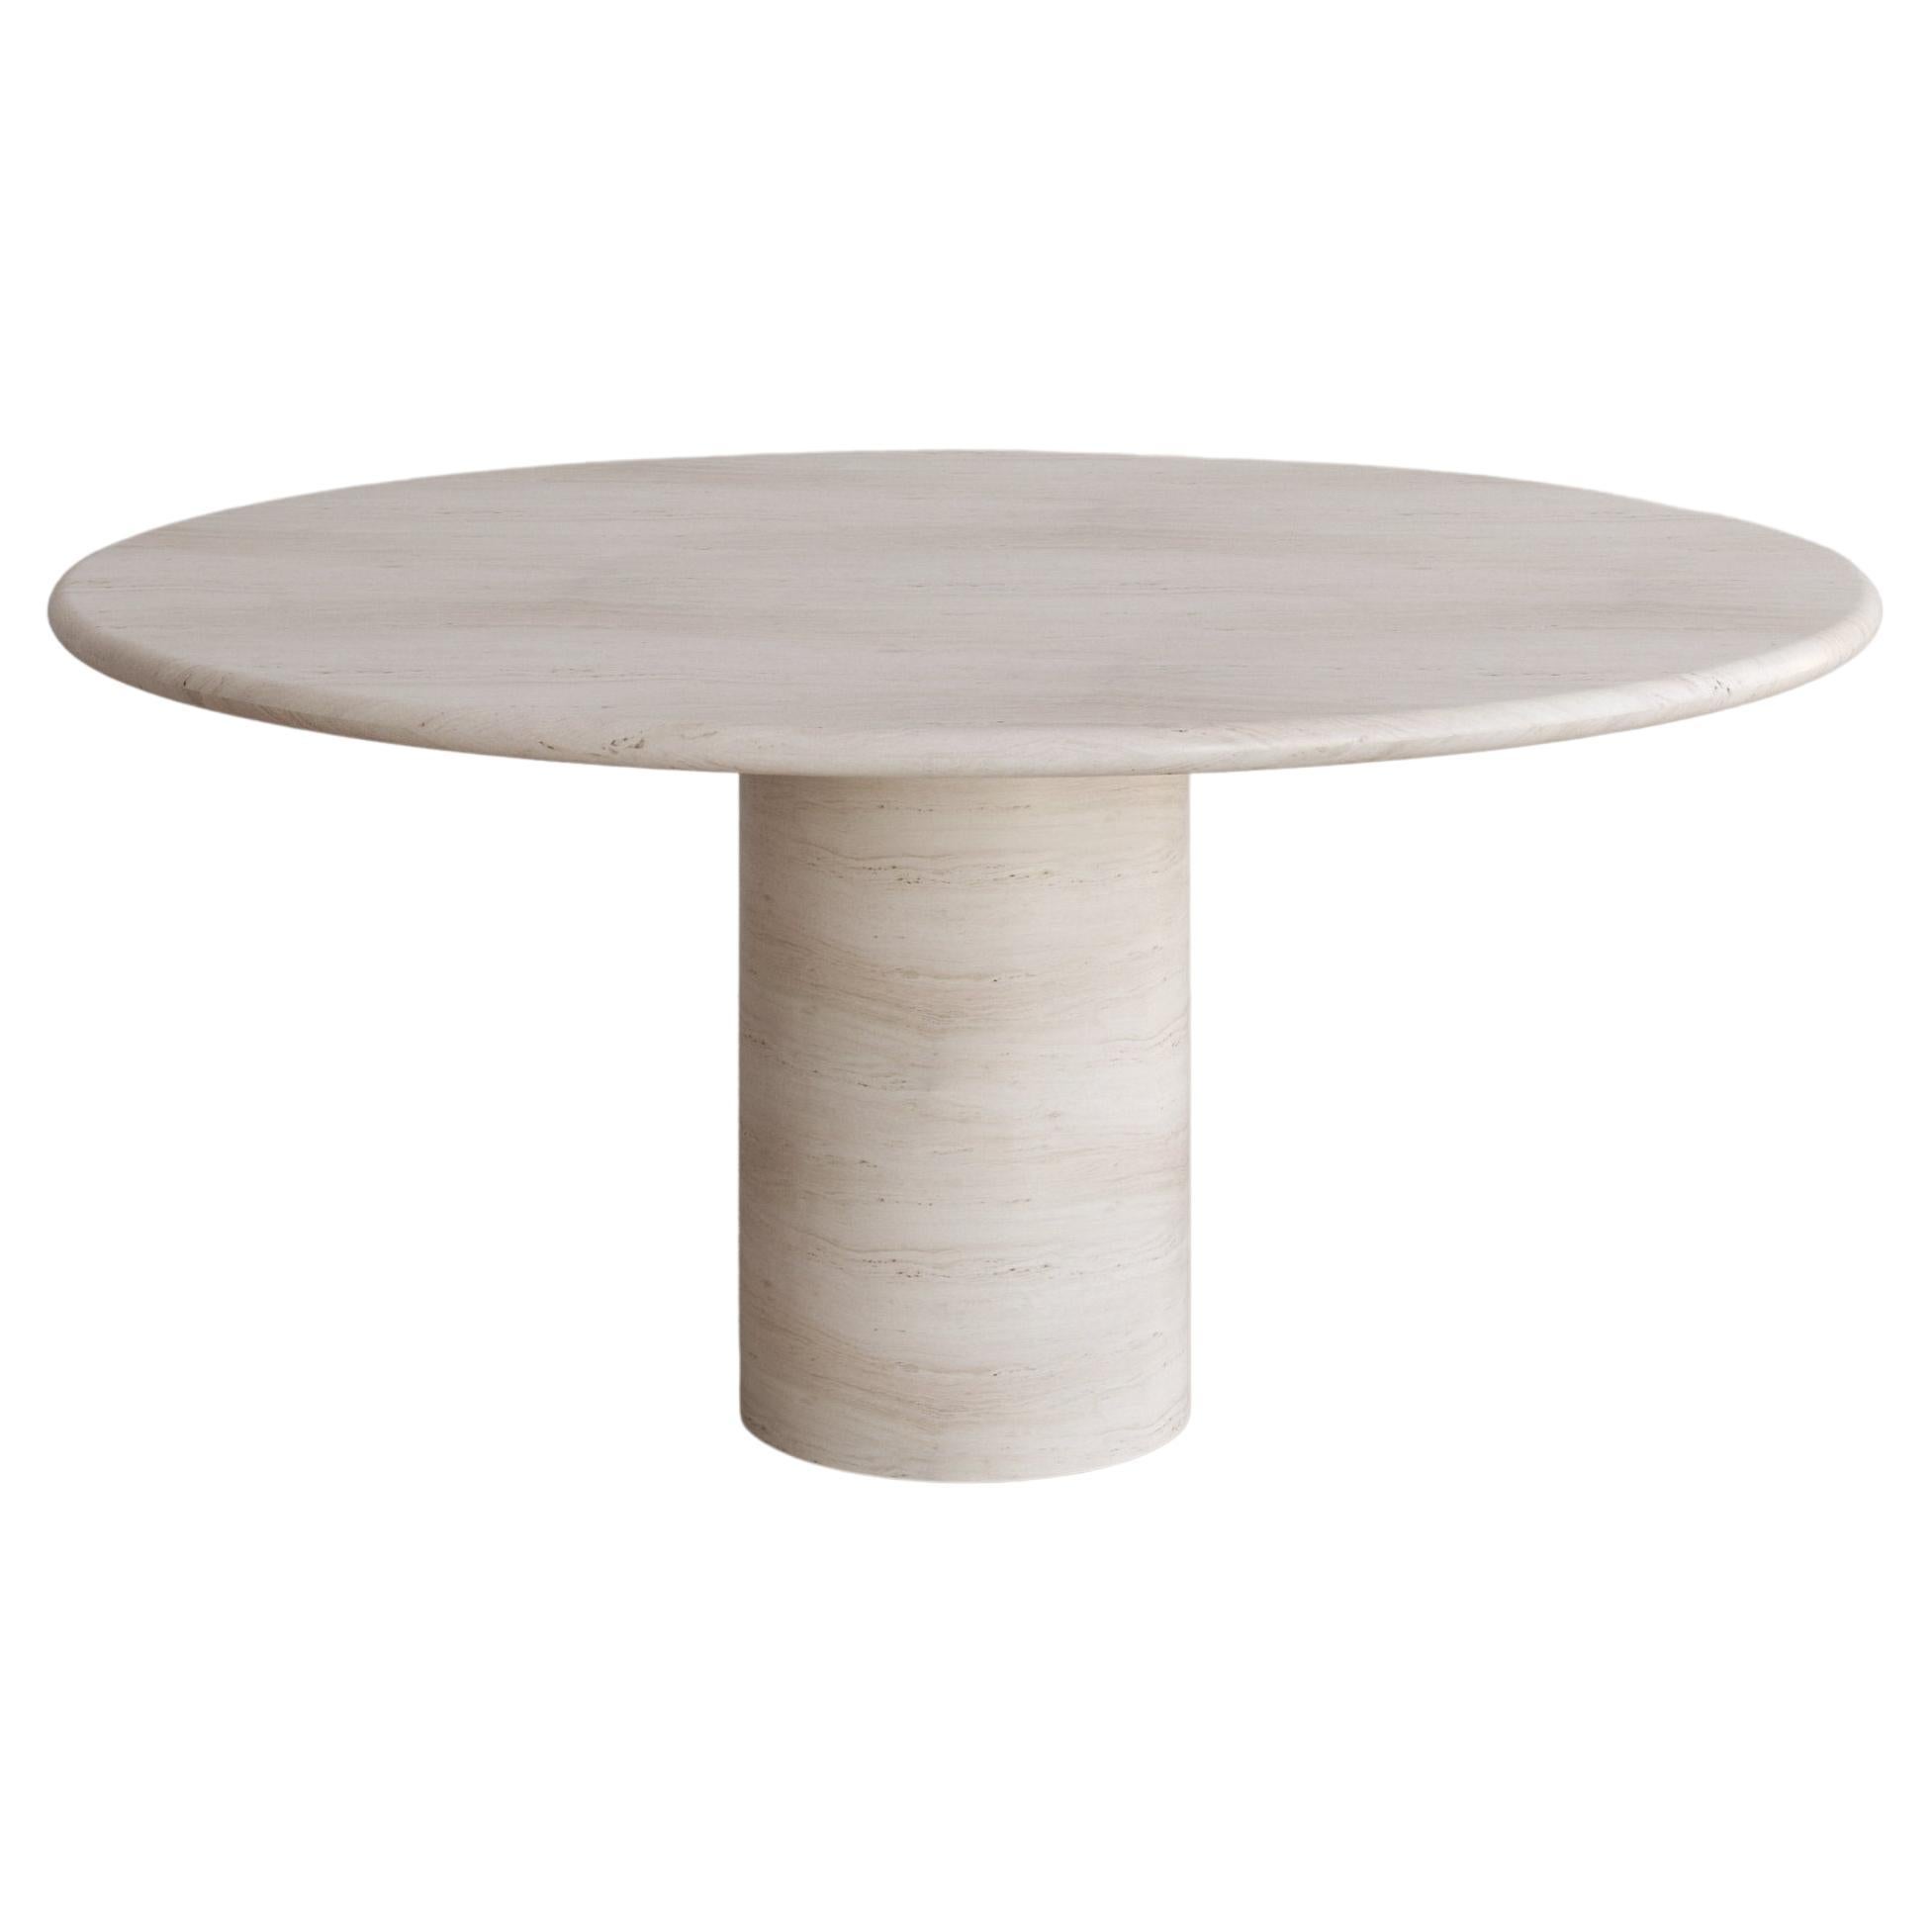 Bianco Travertine Voyage Dining Table i by the Essentialist For Sale